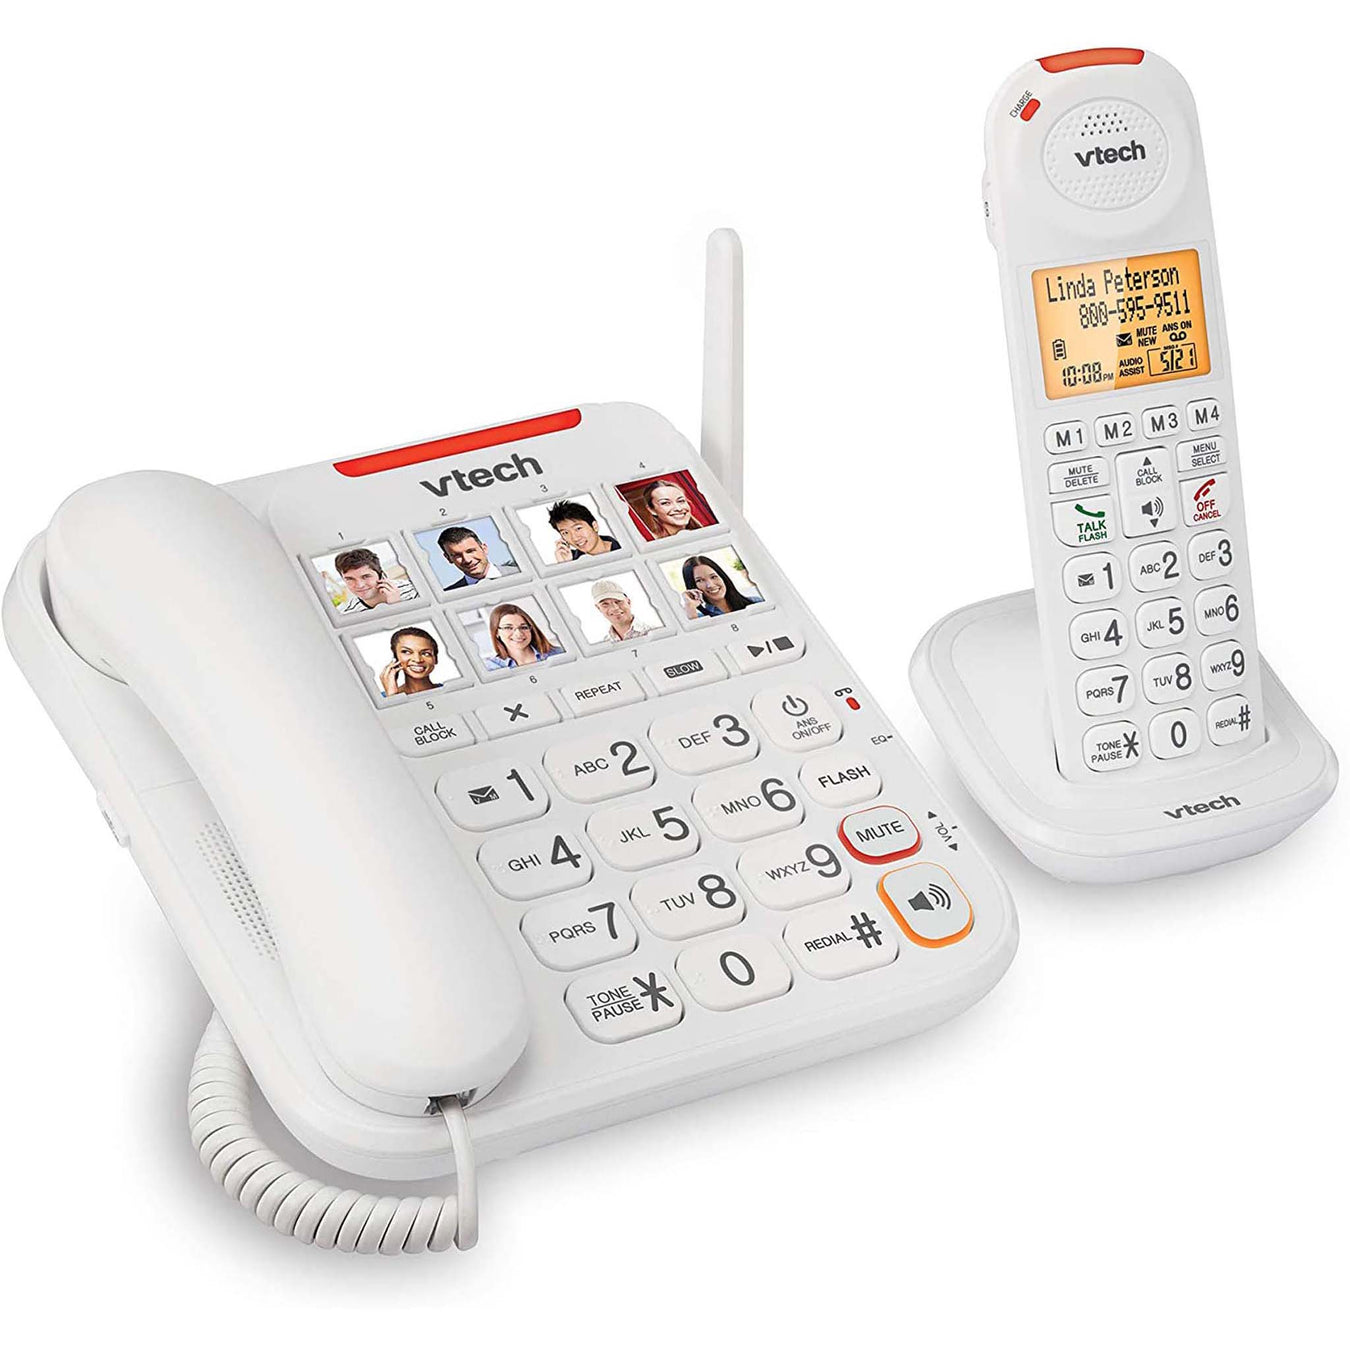 White VTech corded amplified desk phone with photo memory dial buttons.  Beside it sits a cordless phone on the charging base that is included as a package set. 